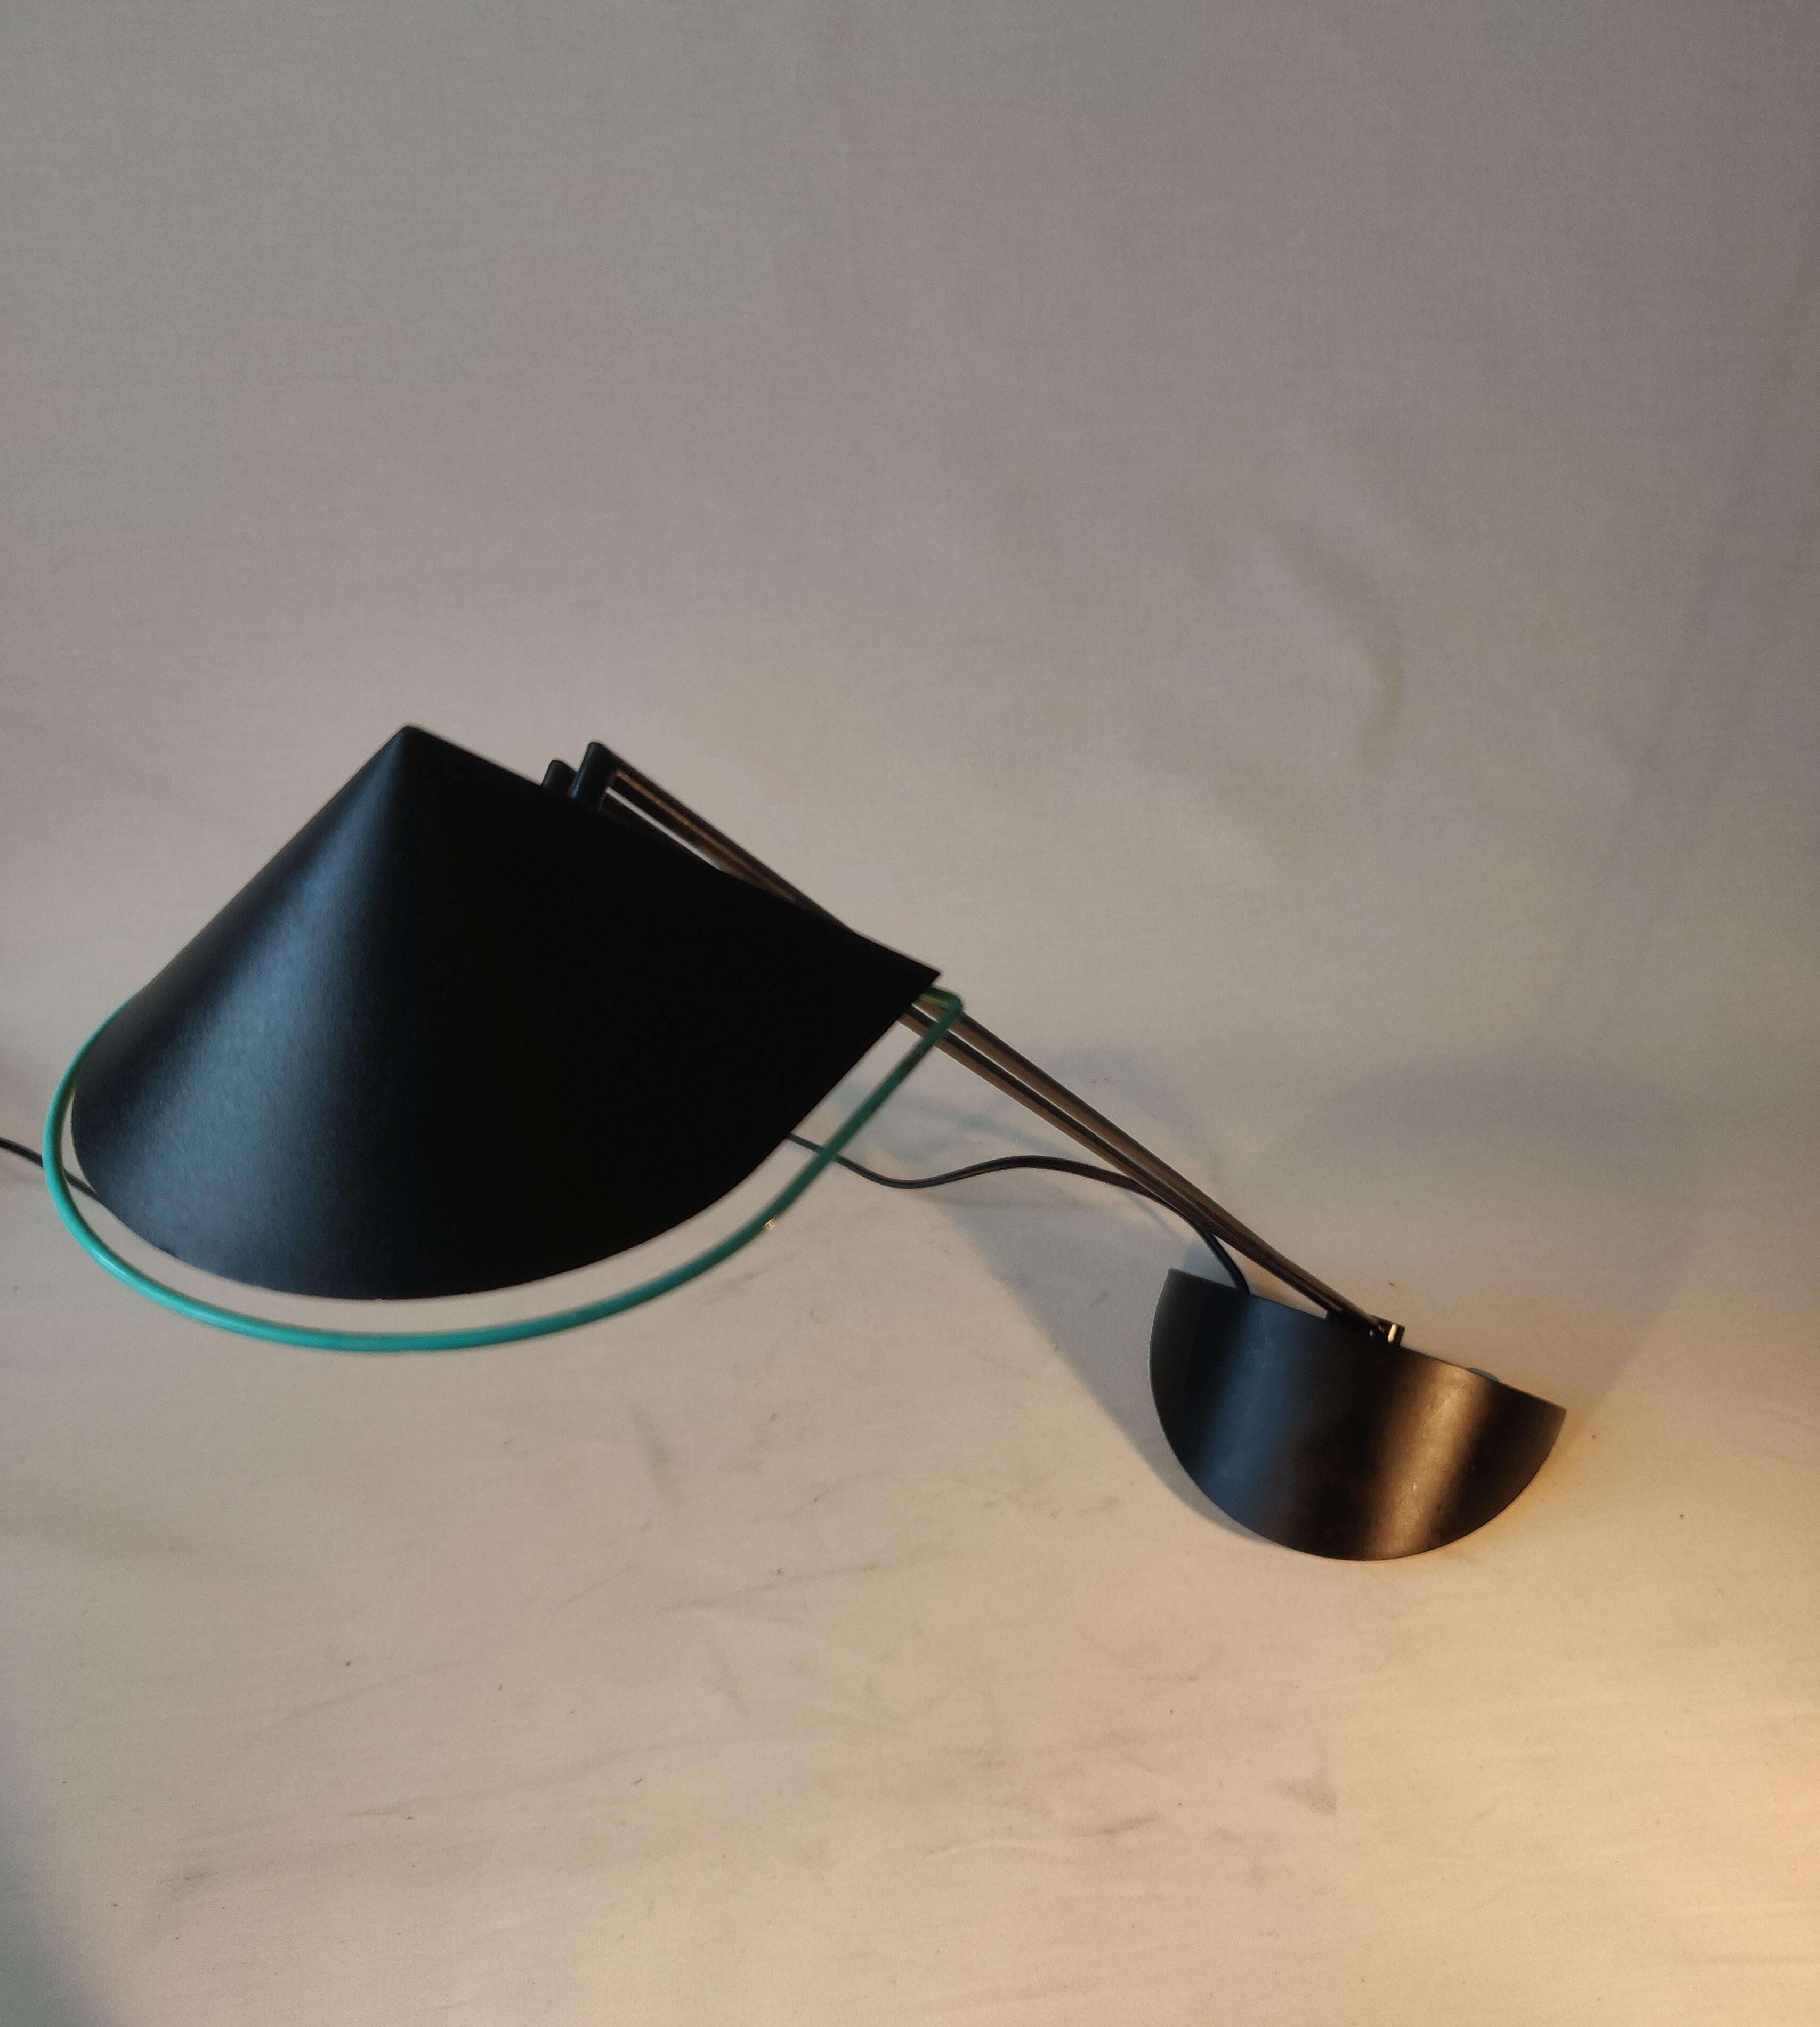 Late 20th Century Dutch Design 'Priola' Desk Lamp by Ad Van Berlo for Indoor, 1980s For Sale